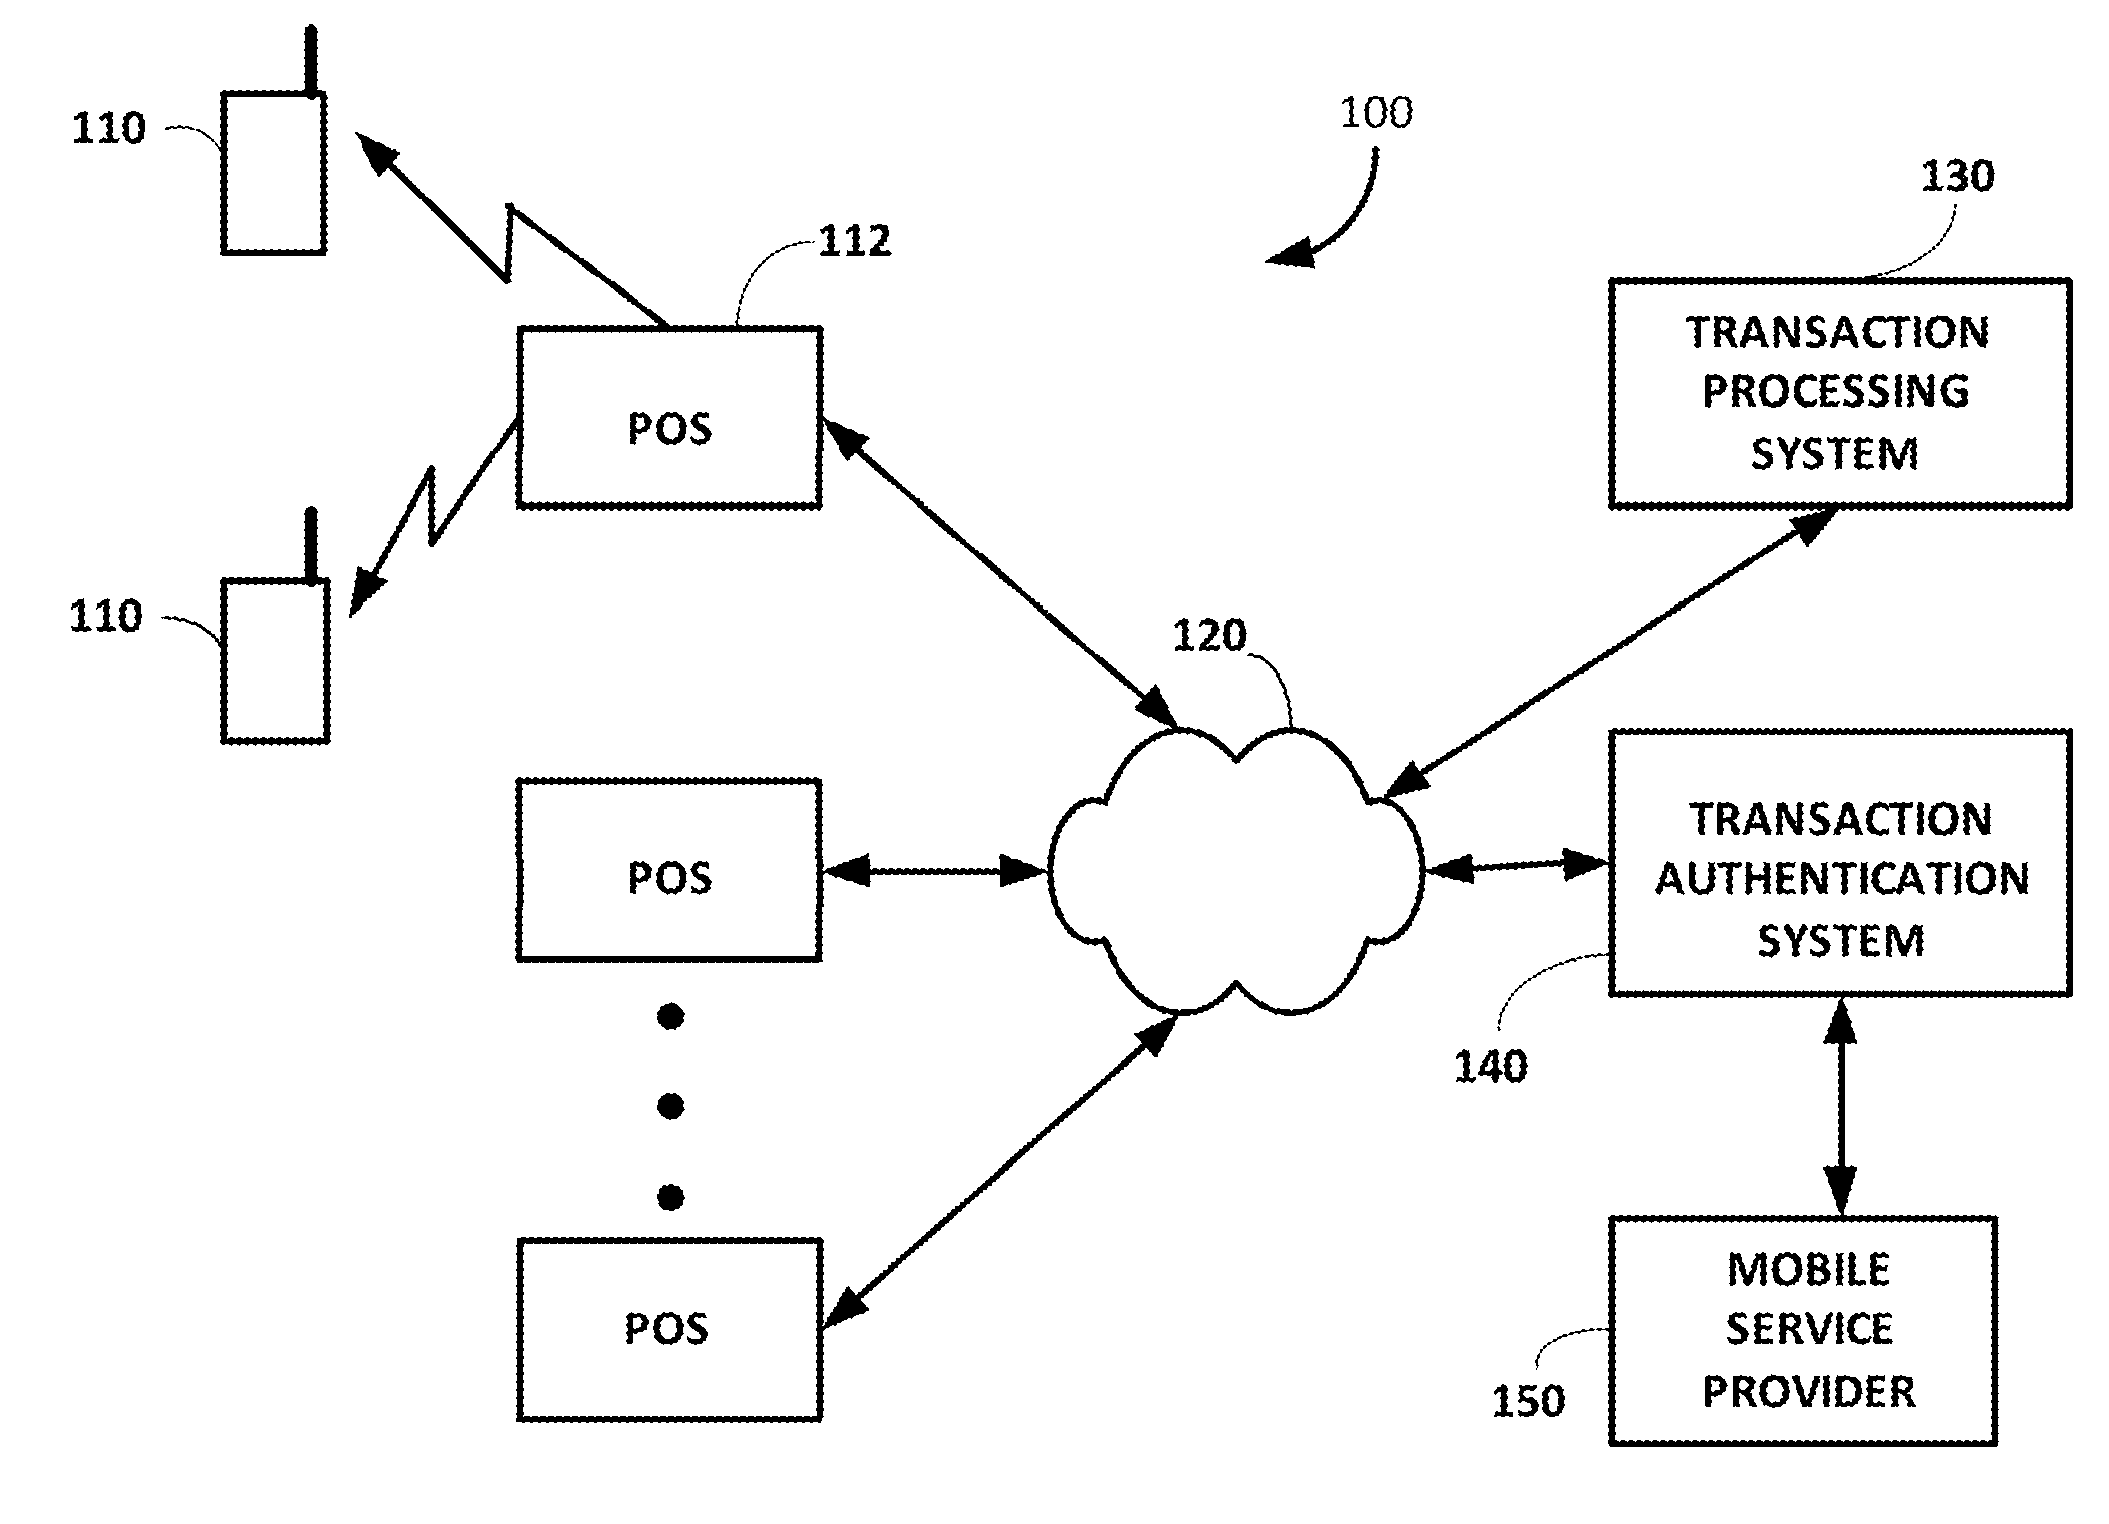 Location-based authentication of transactions conducted using mobile devices